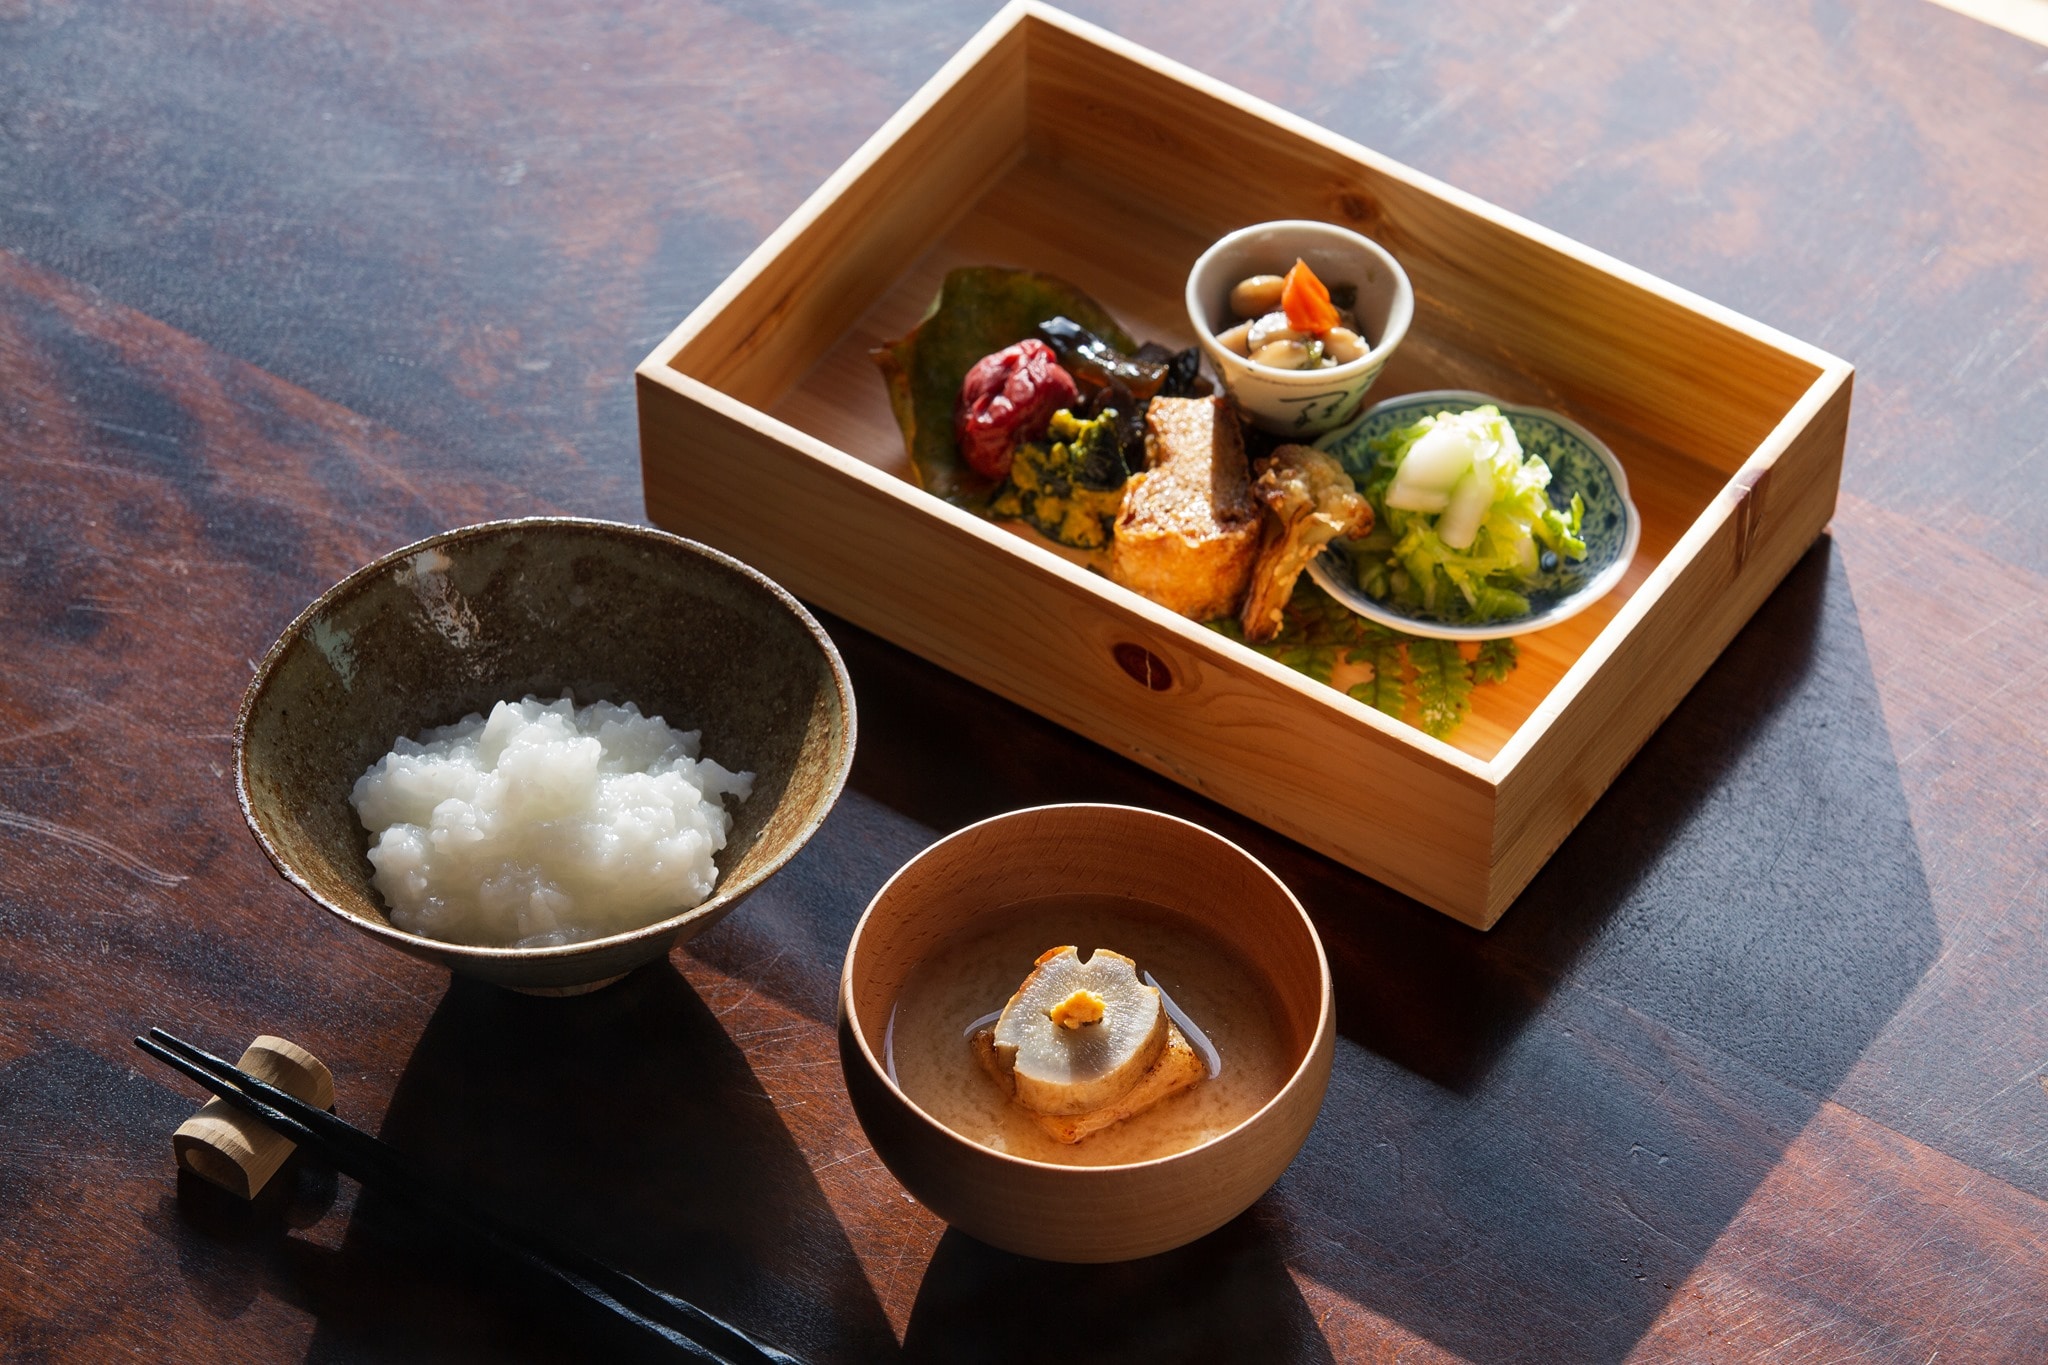 Morning porridge and vegetarian lunch. Eat breakfast at Myotsuji Temple, a national treasure, and experience something you can't do anywhere else.